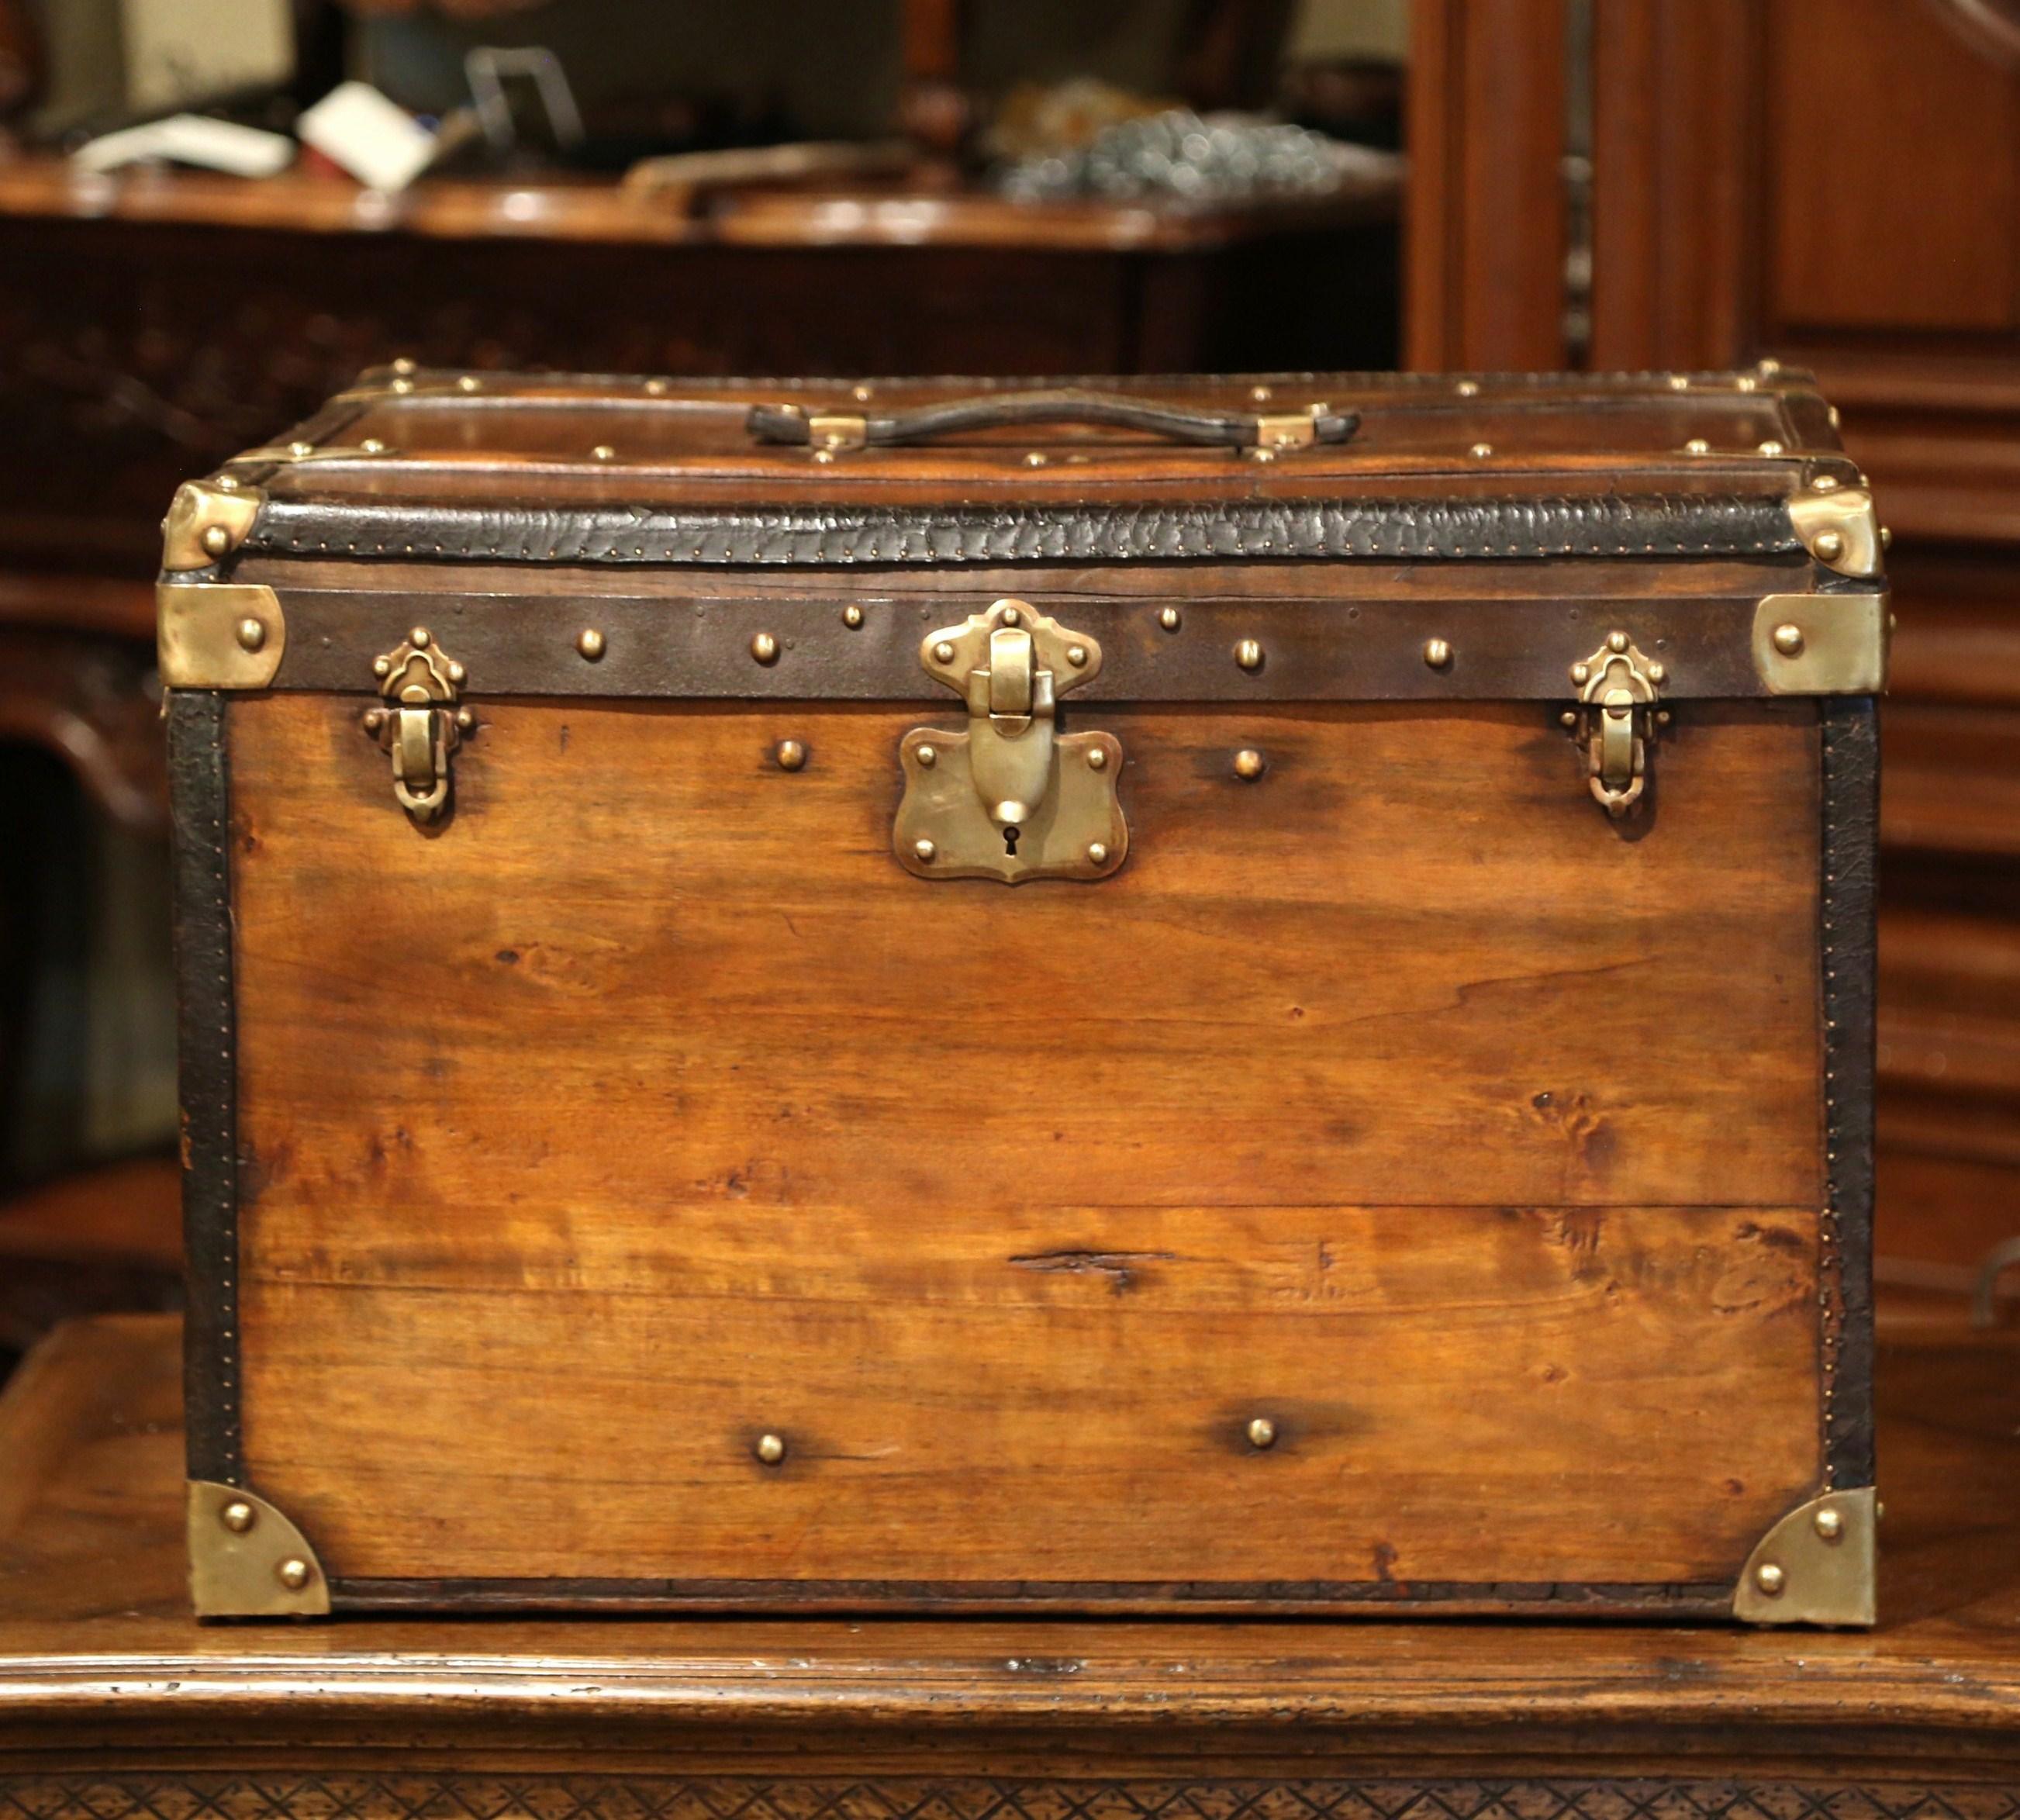 Almost square in shape, this hat suitcase was crafted in Paris, France, circa 1890. The pine box with centre handle features decorative brass mounts in the corners and leather straps embellished with brass nailheads. The inside is upholstered with